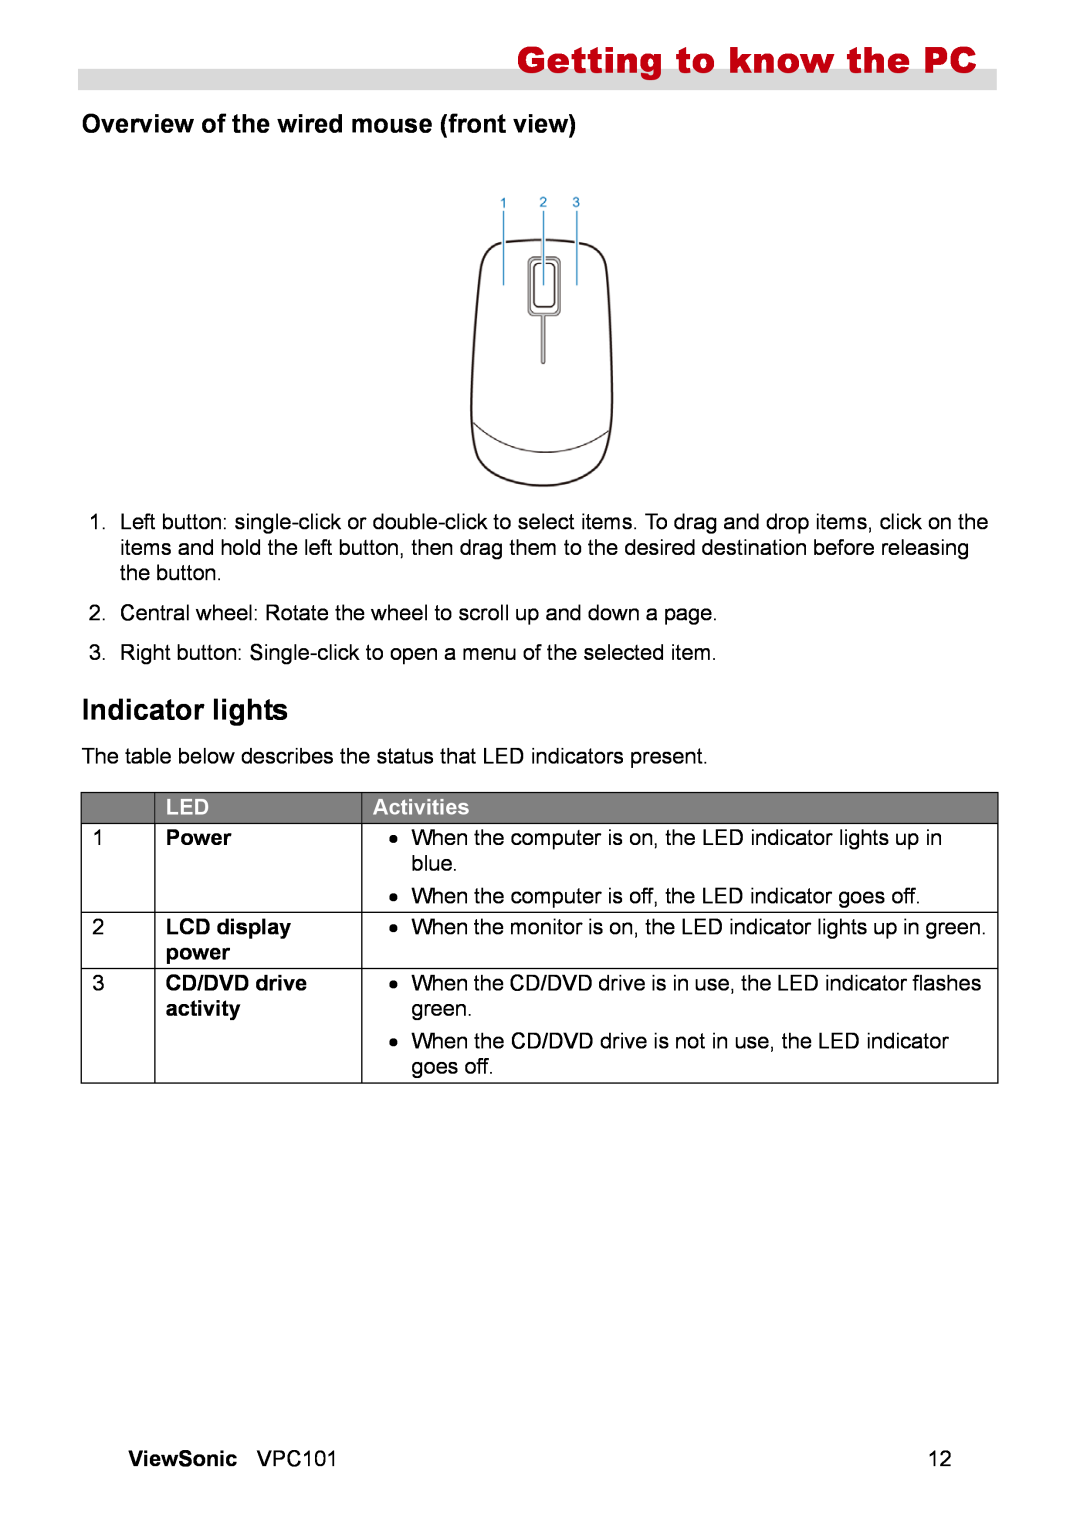 ViewSonic VS12602 manual Indicator lights, Overview of the wired mouse front view, Activities, Getting to know the PC 